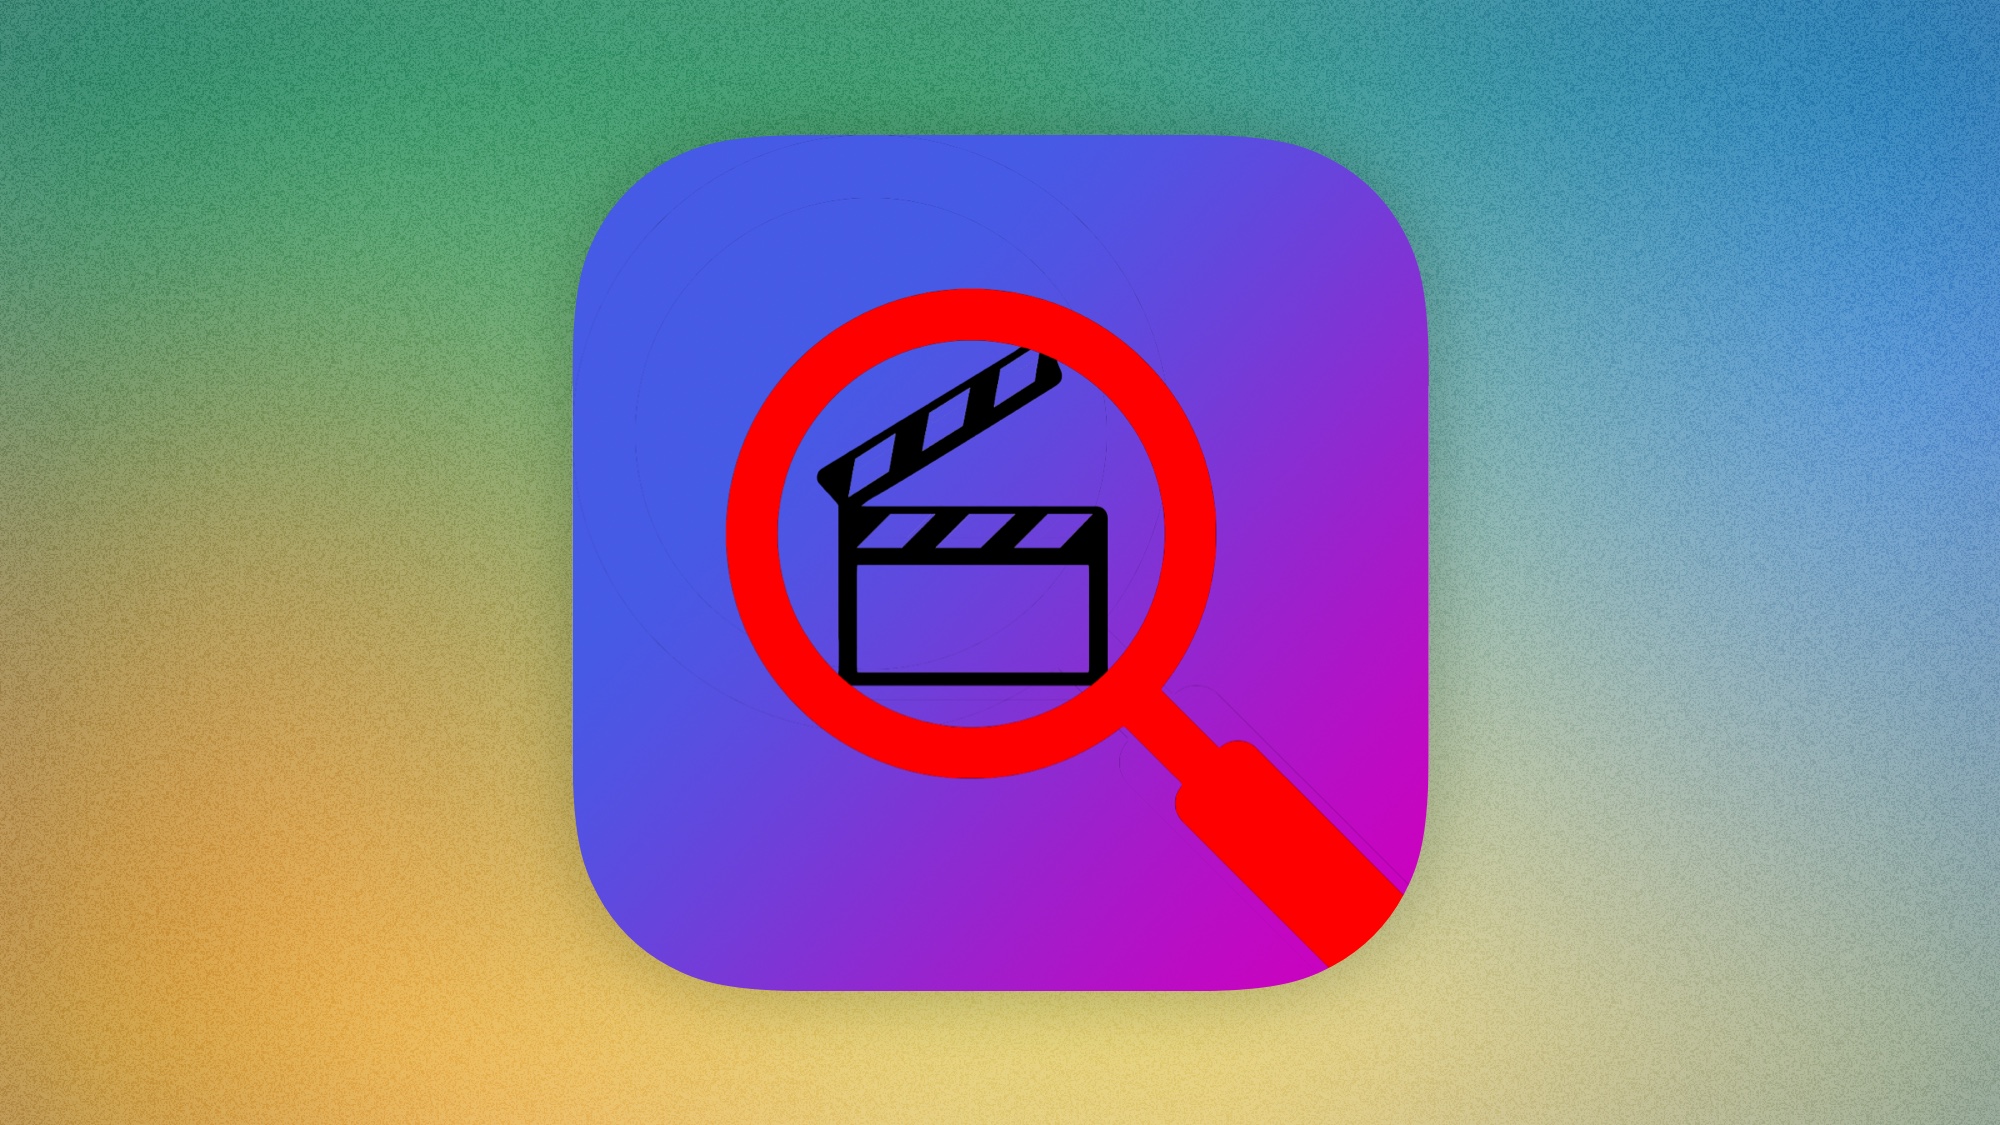 An app icon centred over a colourful background. It depicts a red magnifying glass with a depiction of a film slate showing in the lens. The clapper stick is open. The background of the icon is a gradient from blue in the top left corner to purple in the bottom right.